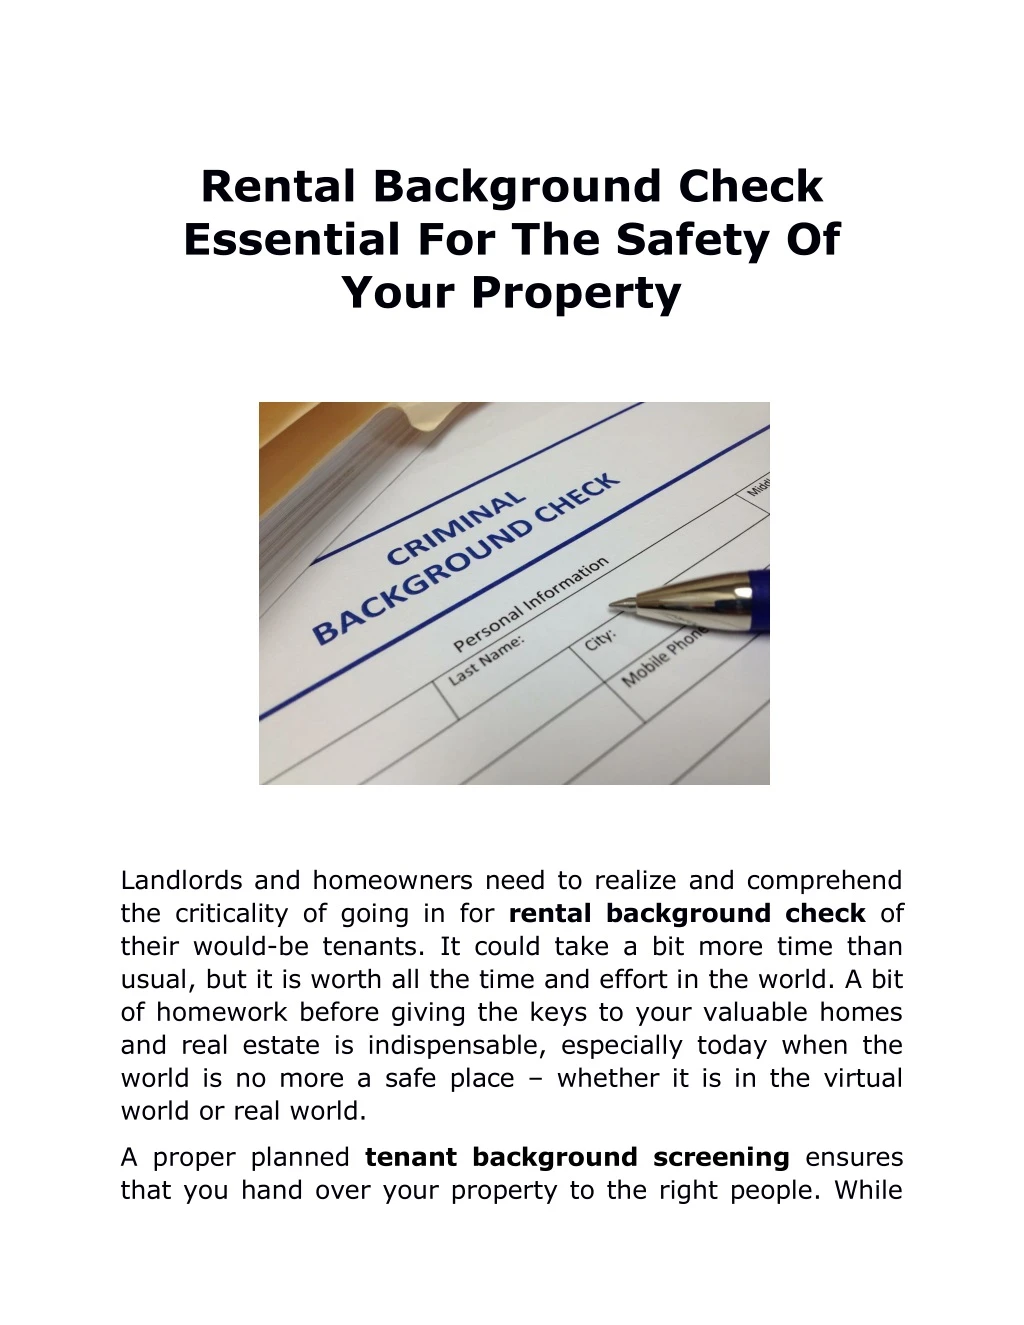 rental background check essential for the safety